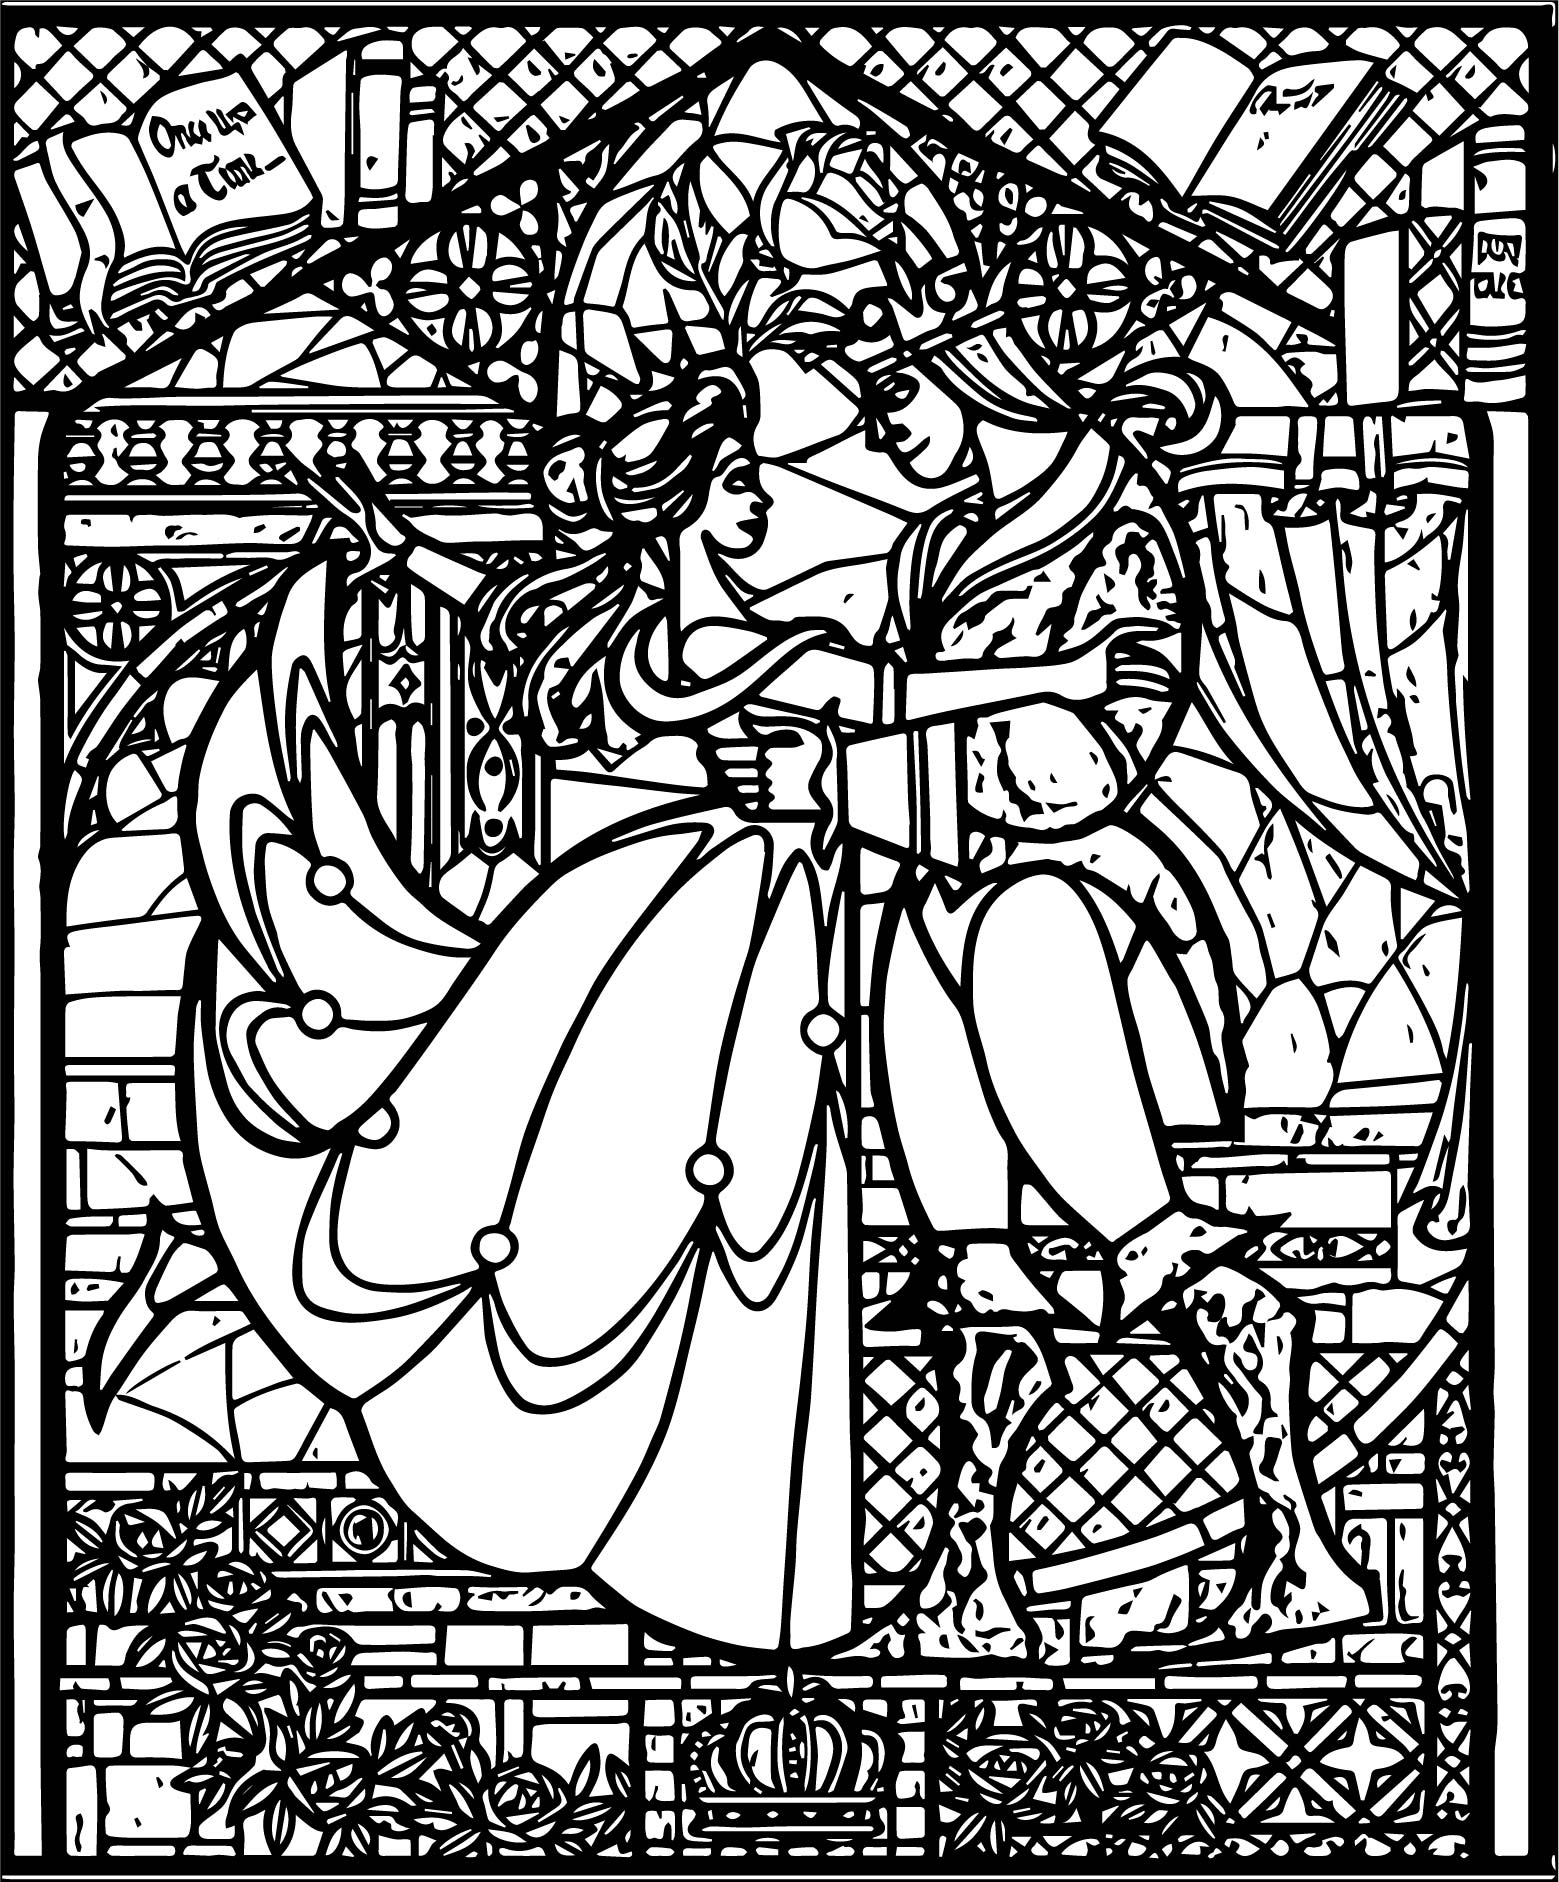 printable stained glass coloring pages